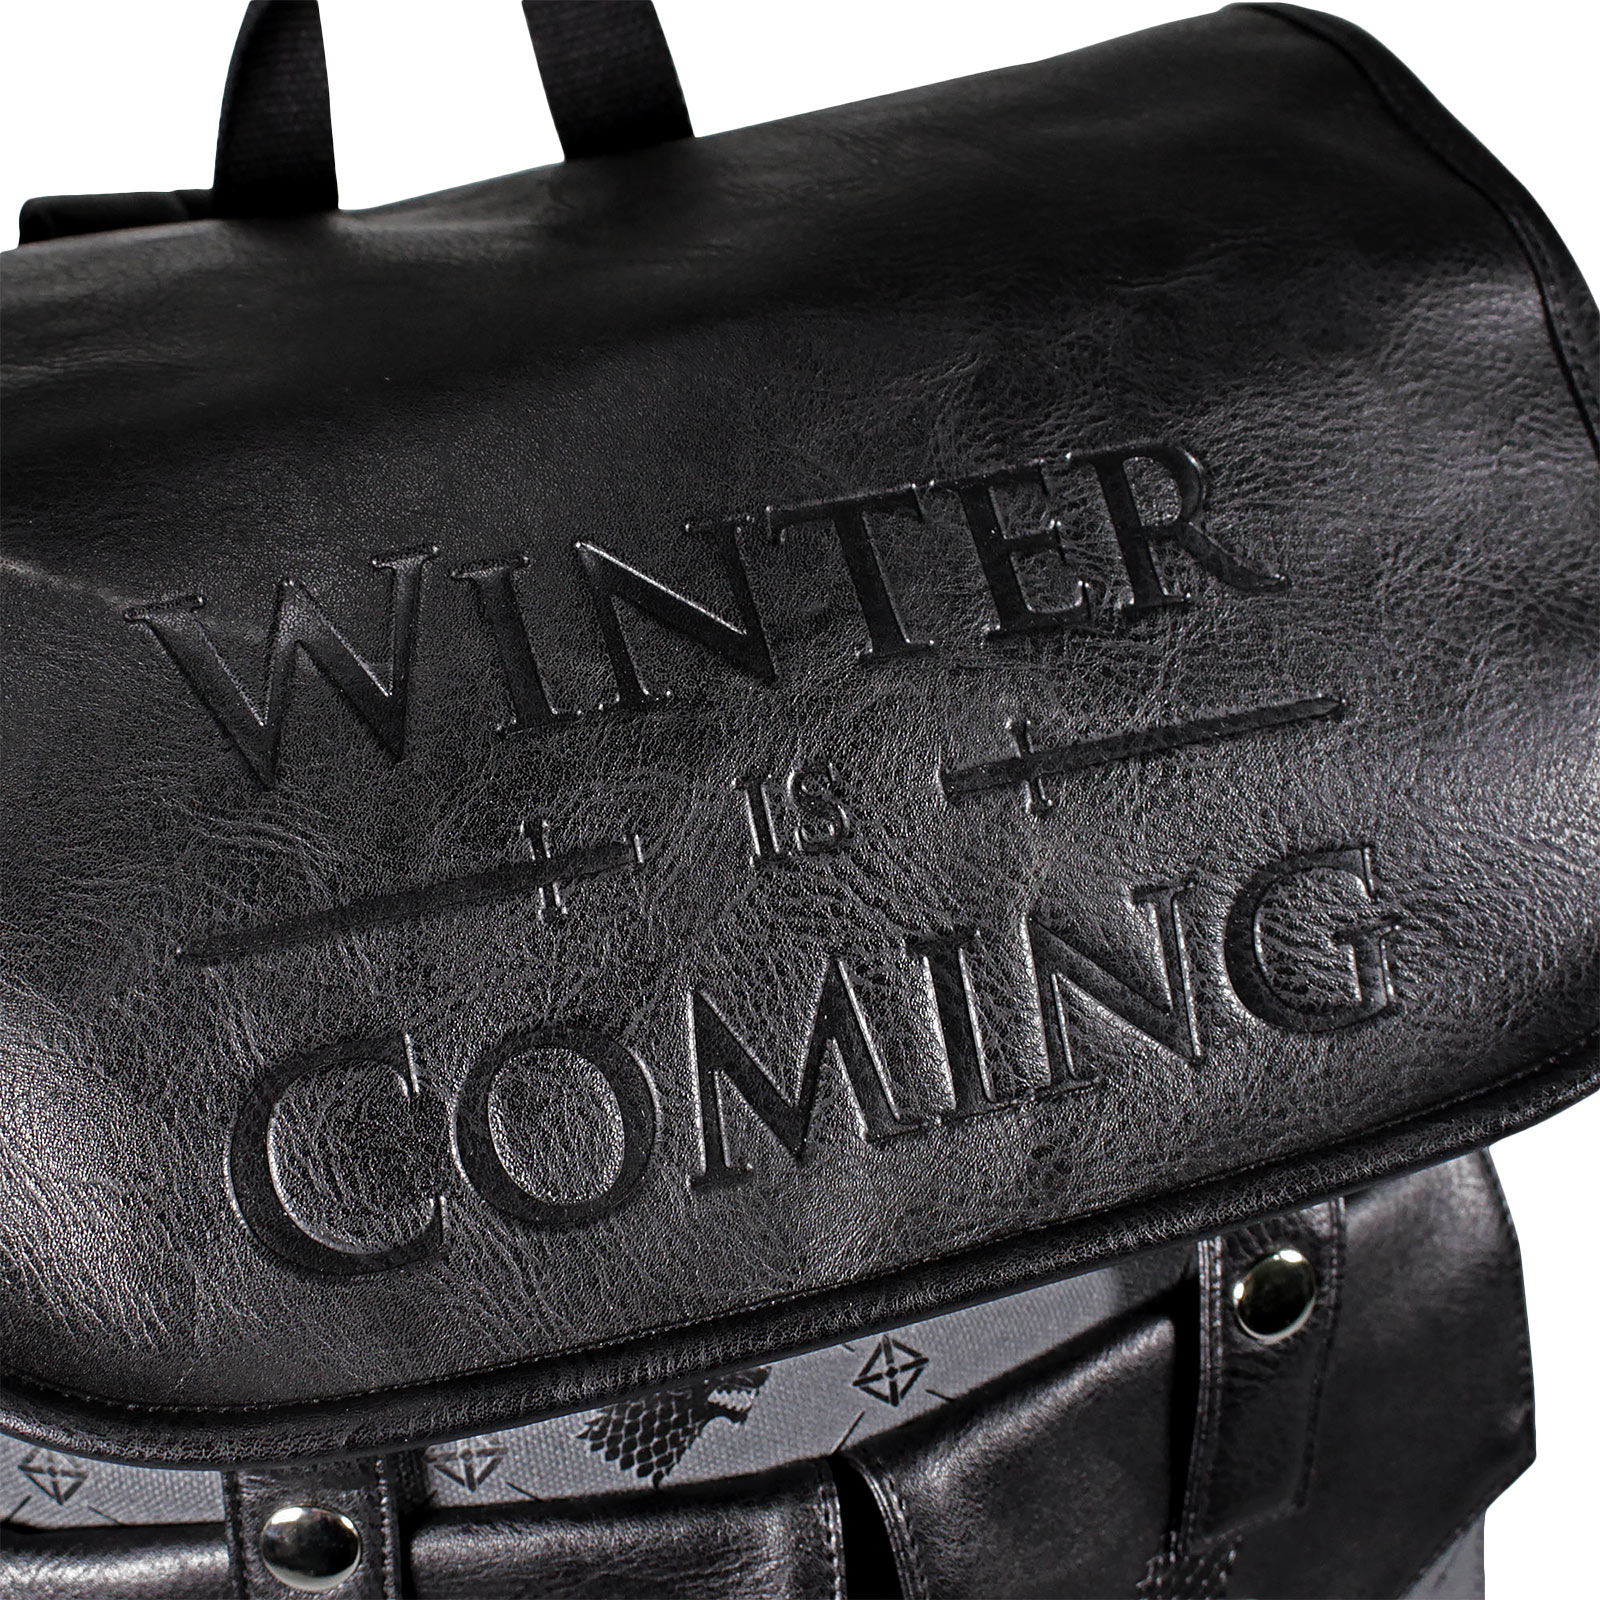 Game of Thrones - Winter is Coming Backpack